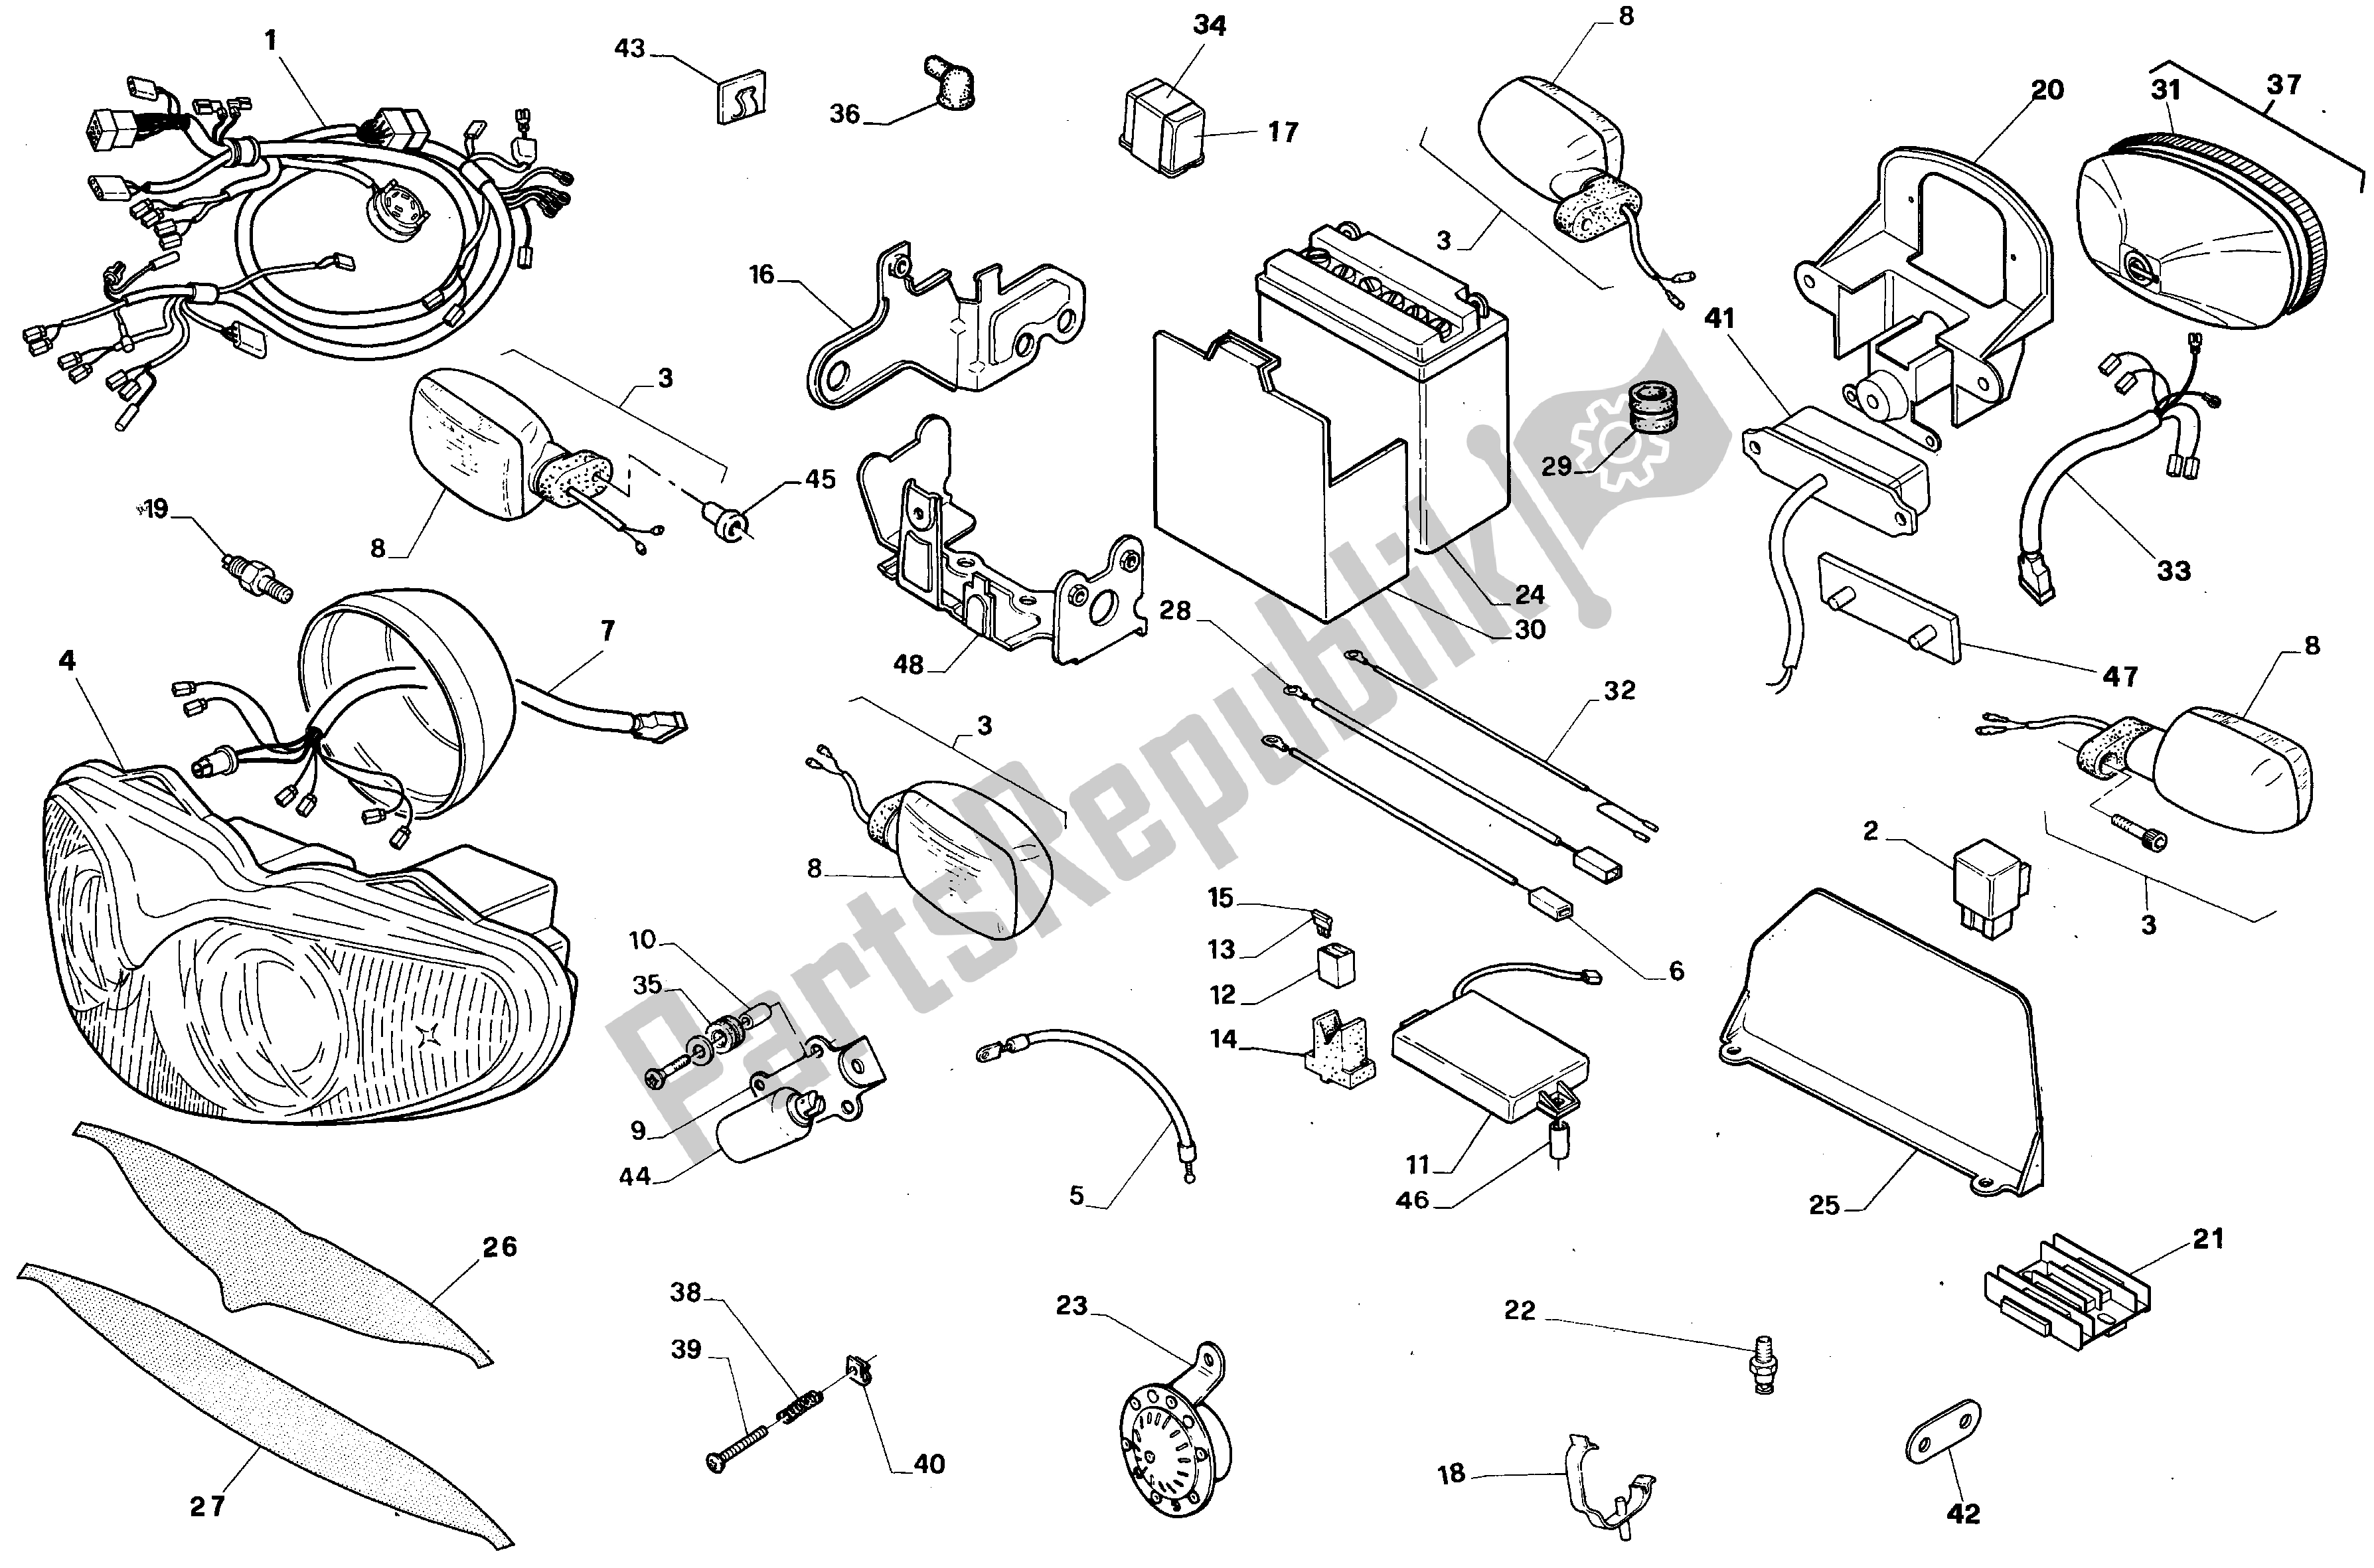 All parts for the Electrical System of the Aprilia RS 125 1995